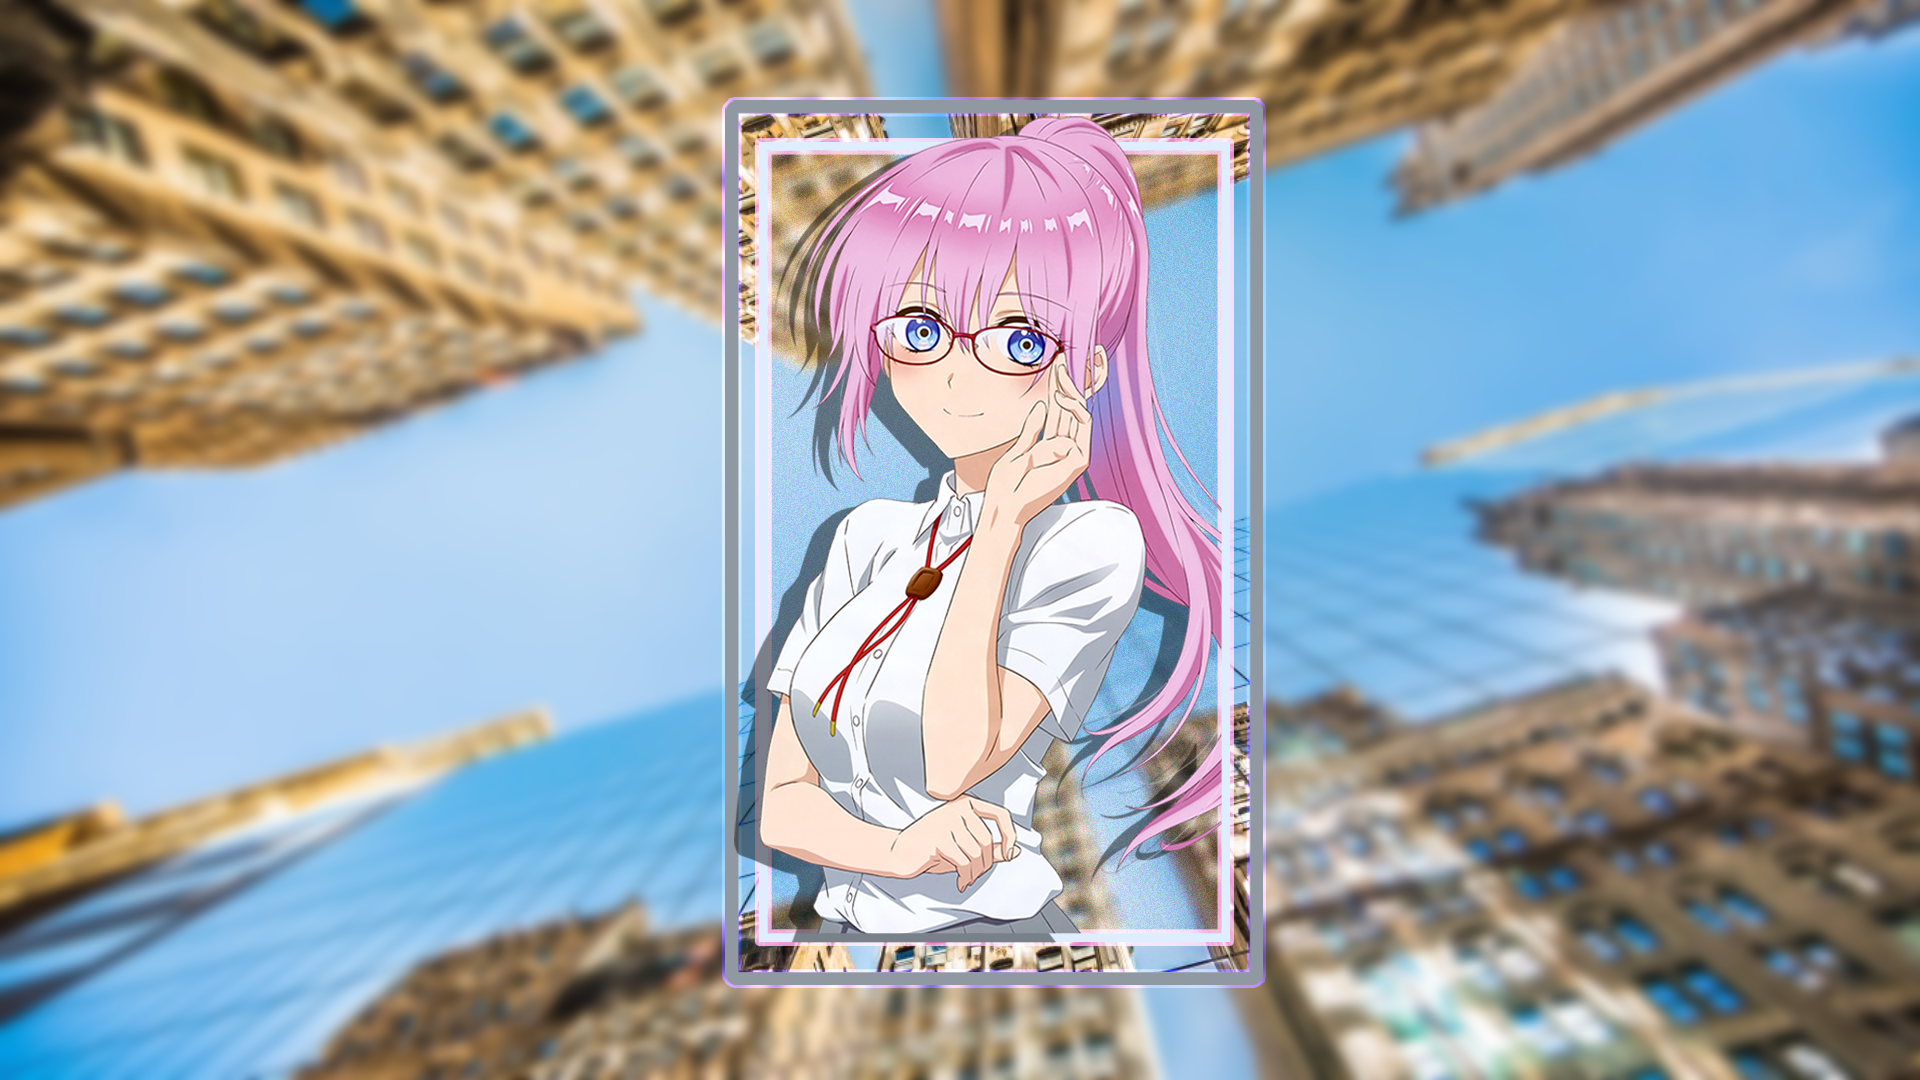 Anime Girls Picture In Picture City Building Sky Glasses Ponytail Blue Eyes Pink Hair Looking At Vie 1920x1080